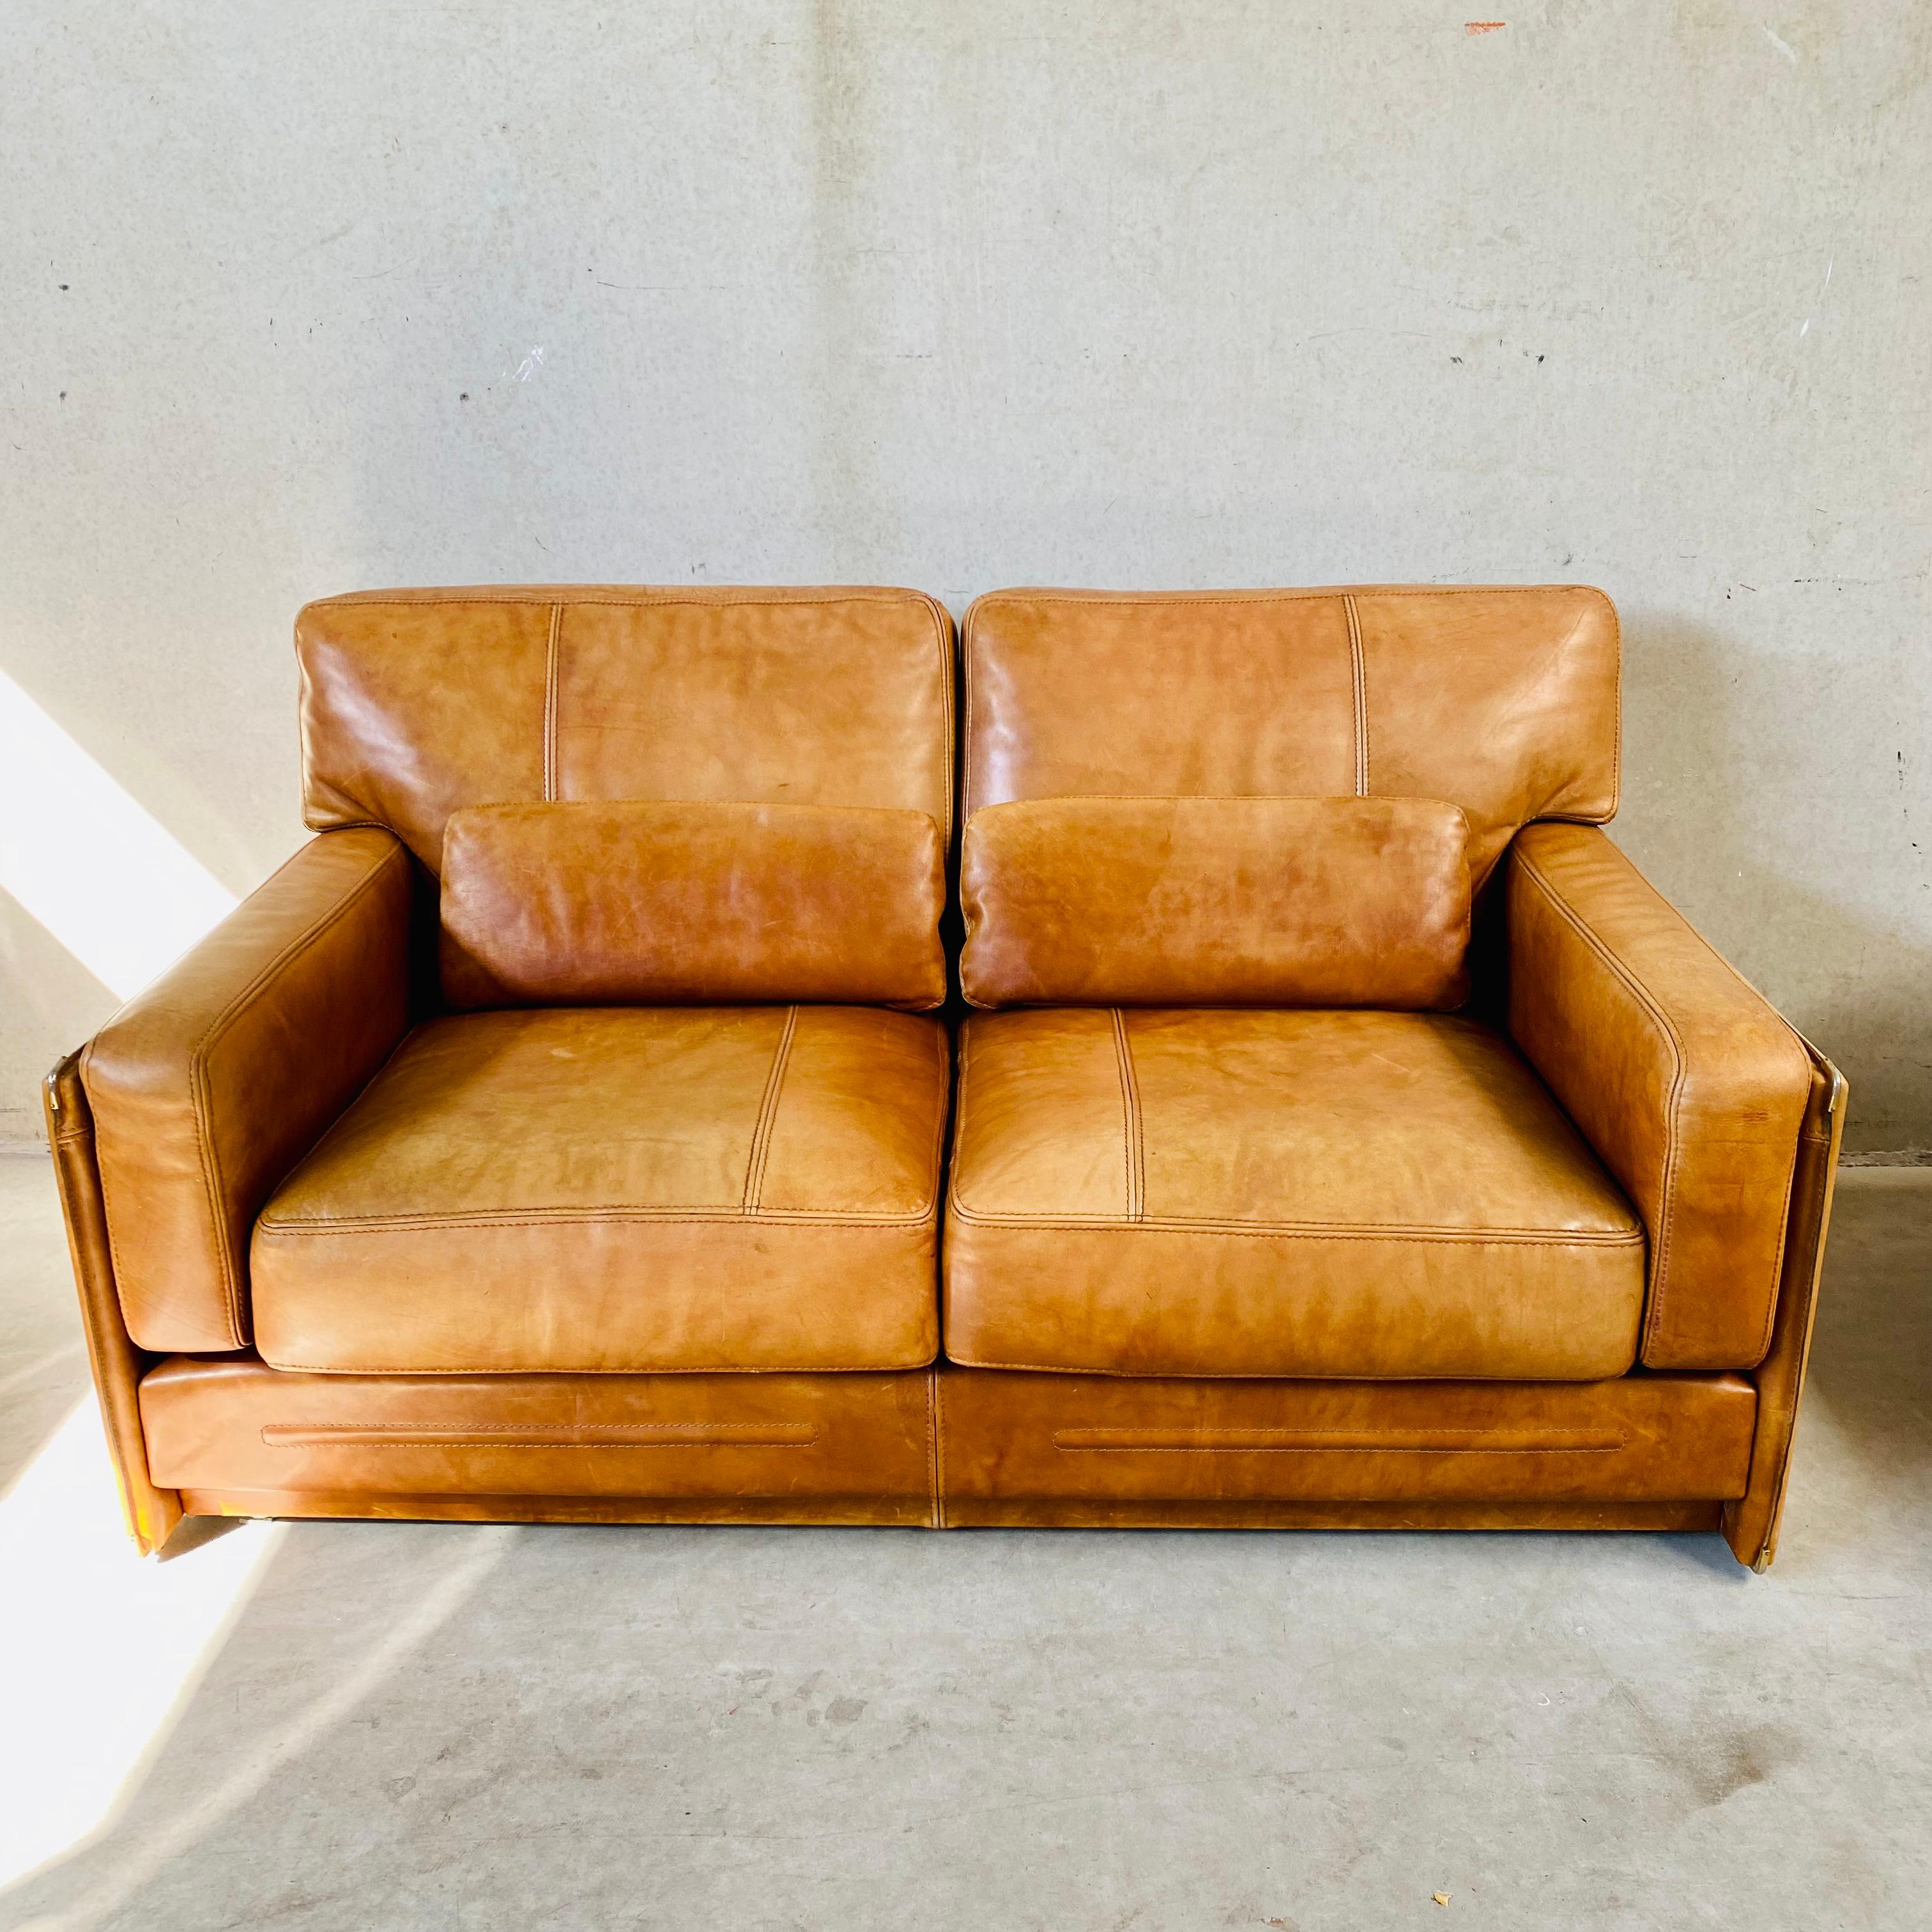 Introducing the exquisite cognac leather 2-seater sofa 1970 by Marco Milisich for Baxter Arcon - a true masterpiece of mid-century design. This stunning piece of furniture boasts a rich heritage that dates back to the 1970s, when Marco Milisich